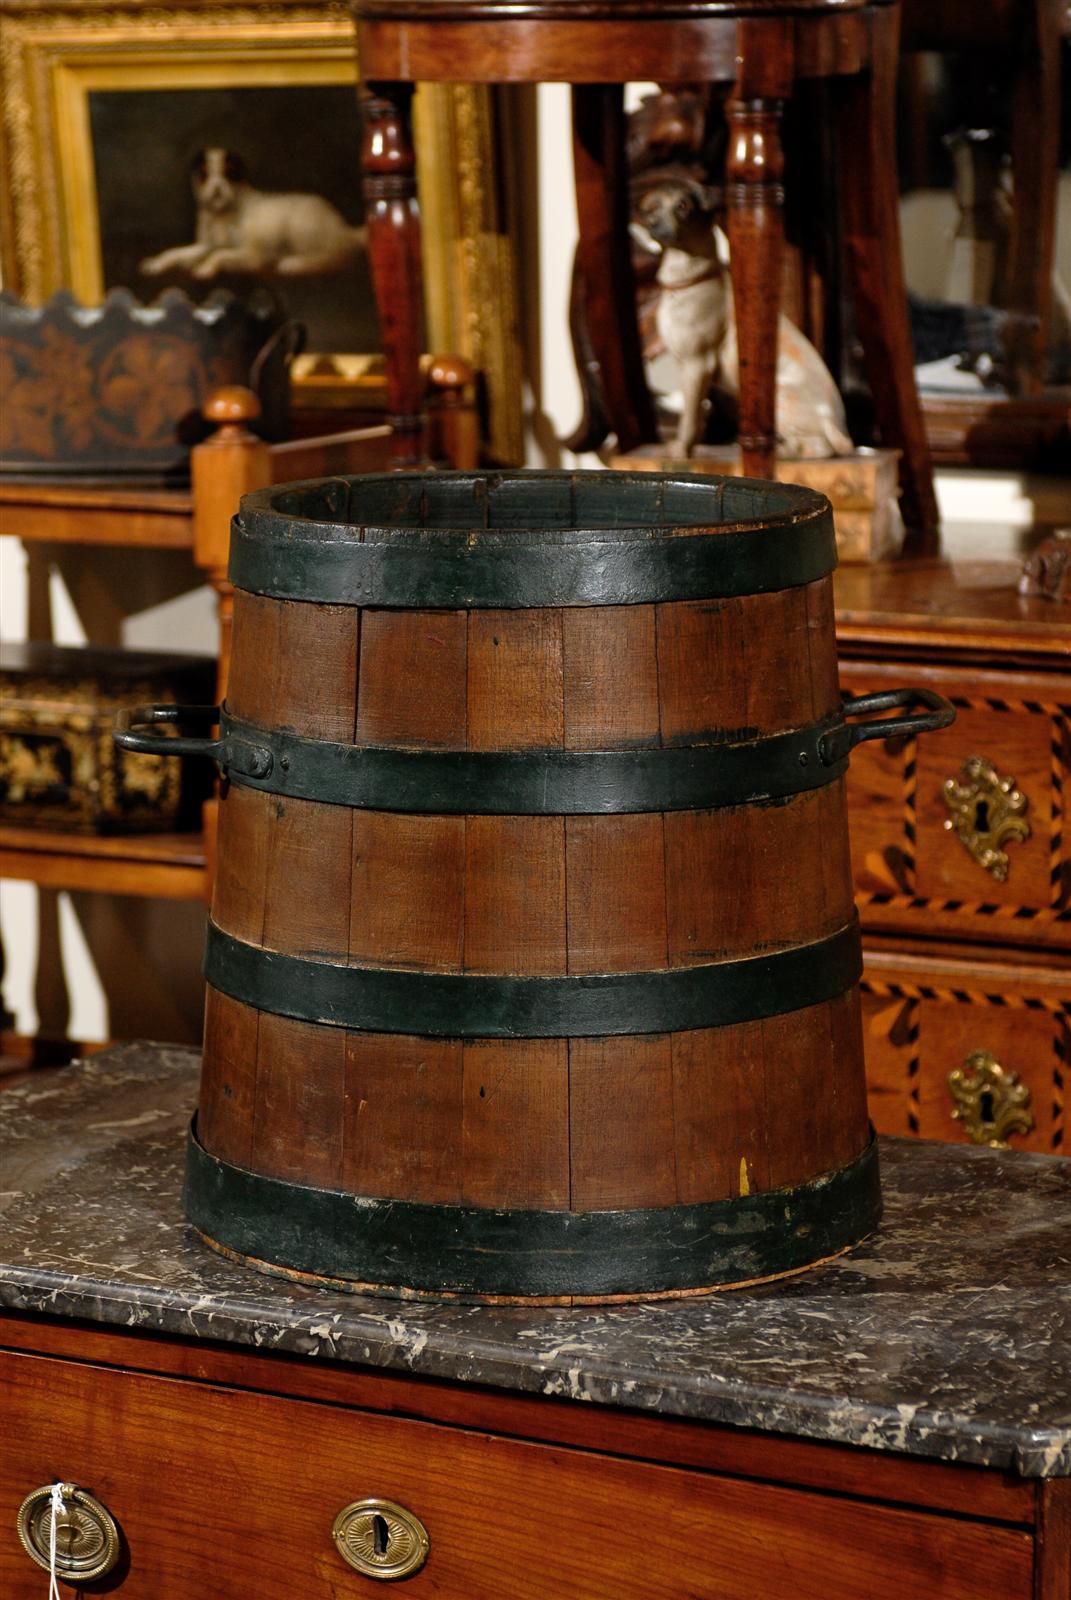 This large size English bucket, circa 1880 features a circular shape, flaring towards the bottom with four iron bands wrapped around the wooden slats. Two iron handles on each side make for easy moving. This English bucket could be used as storage,